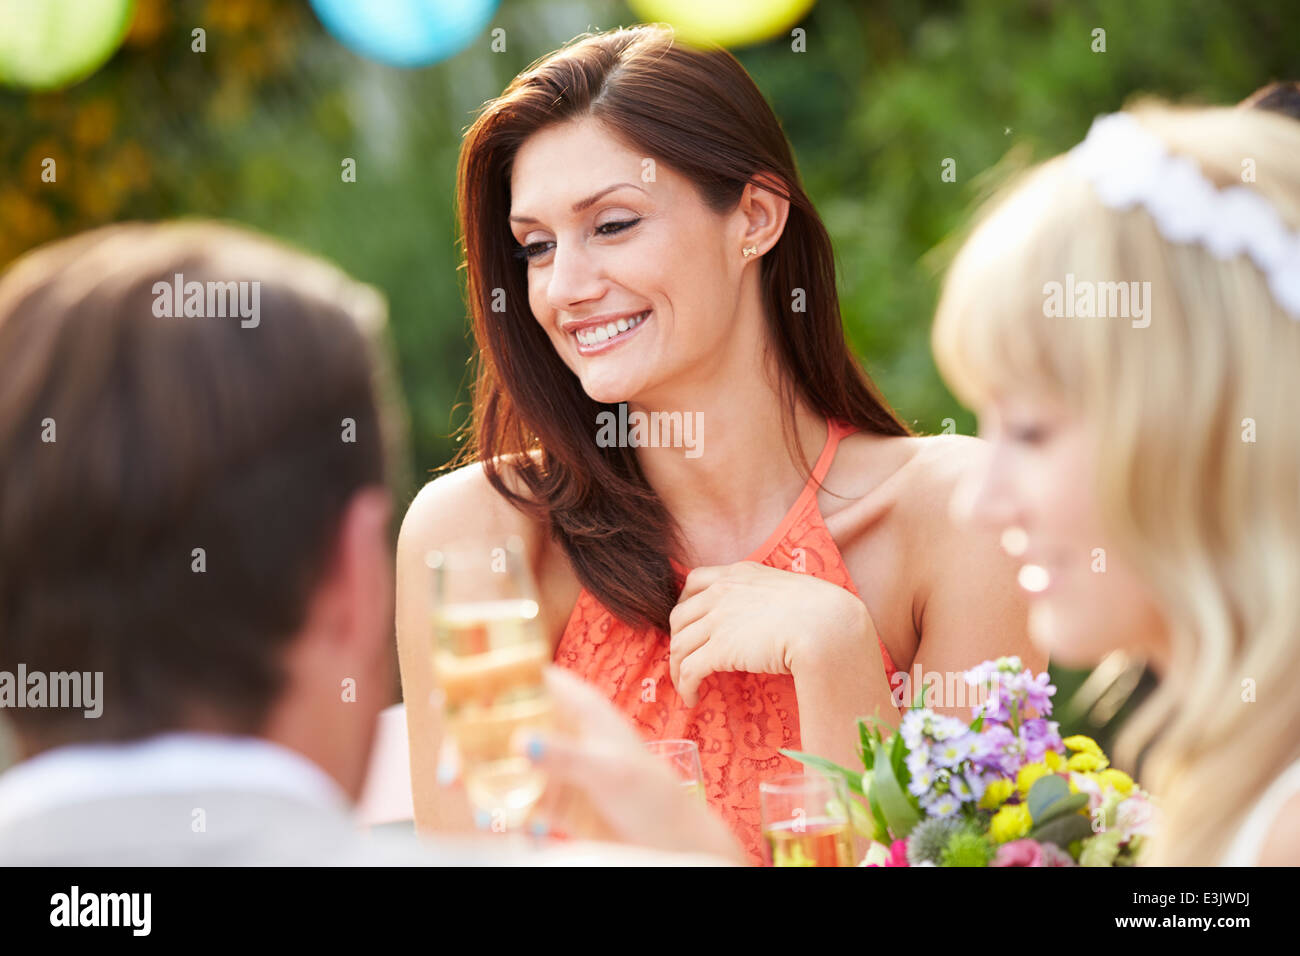 Female Guest At Wedding Reception Stock Photo